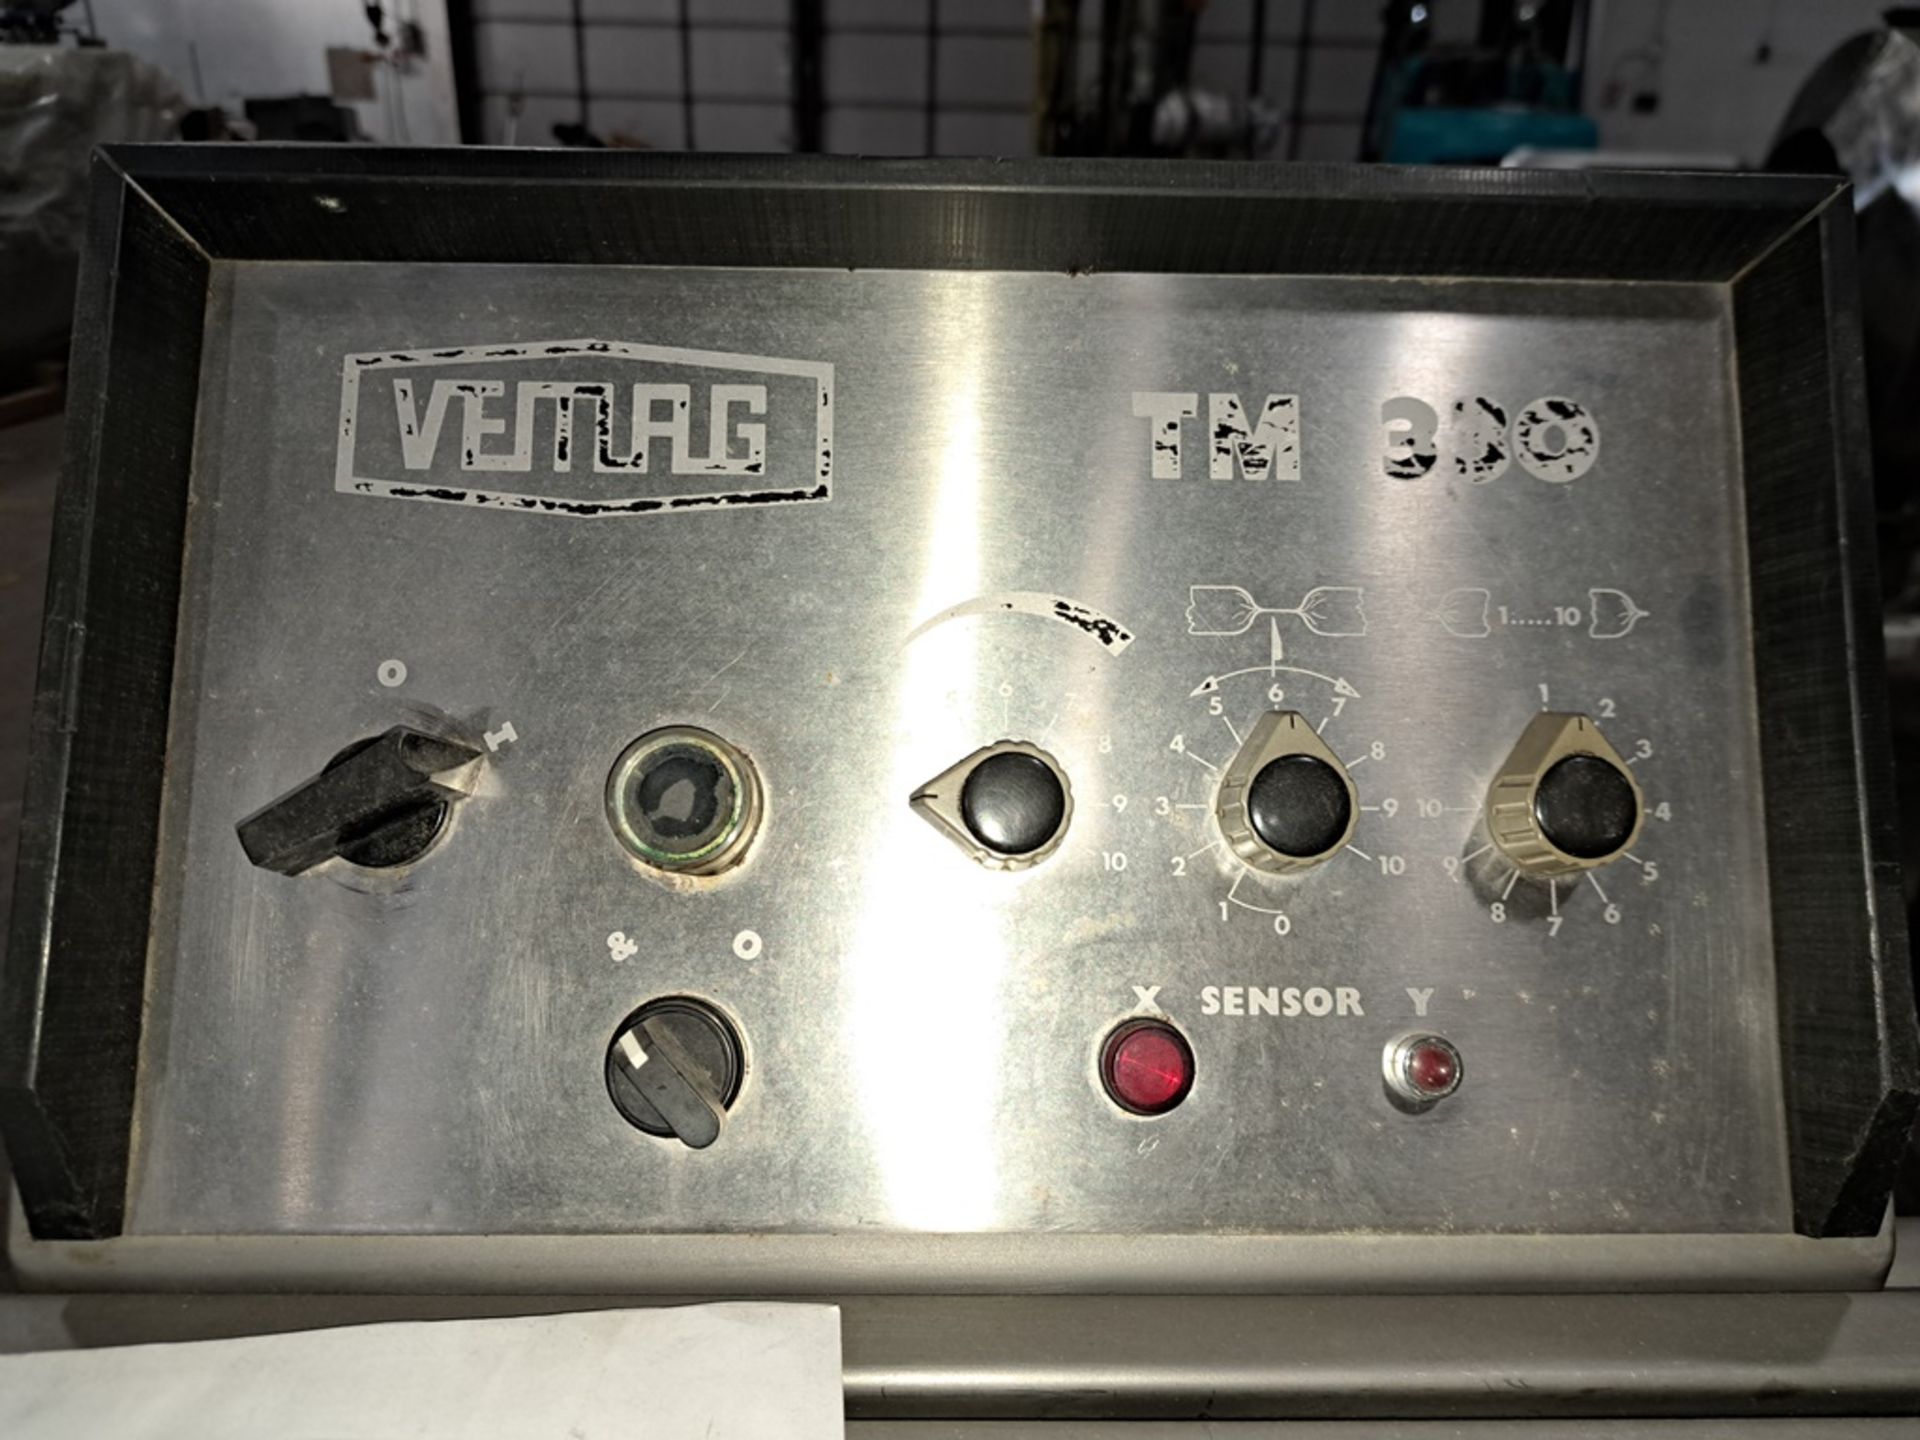 Vemag Mdl. TM330 Sausage Cutting Machine, 208 volts, 3 phase, Mfg. 1990, Ser. #330.0041 (Located - Image 5 of 7